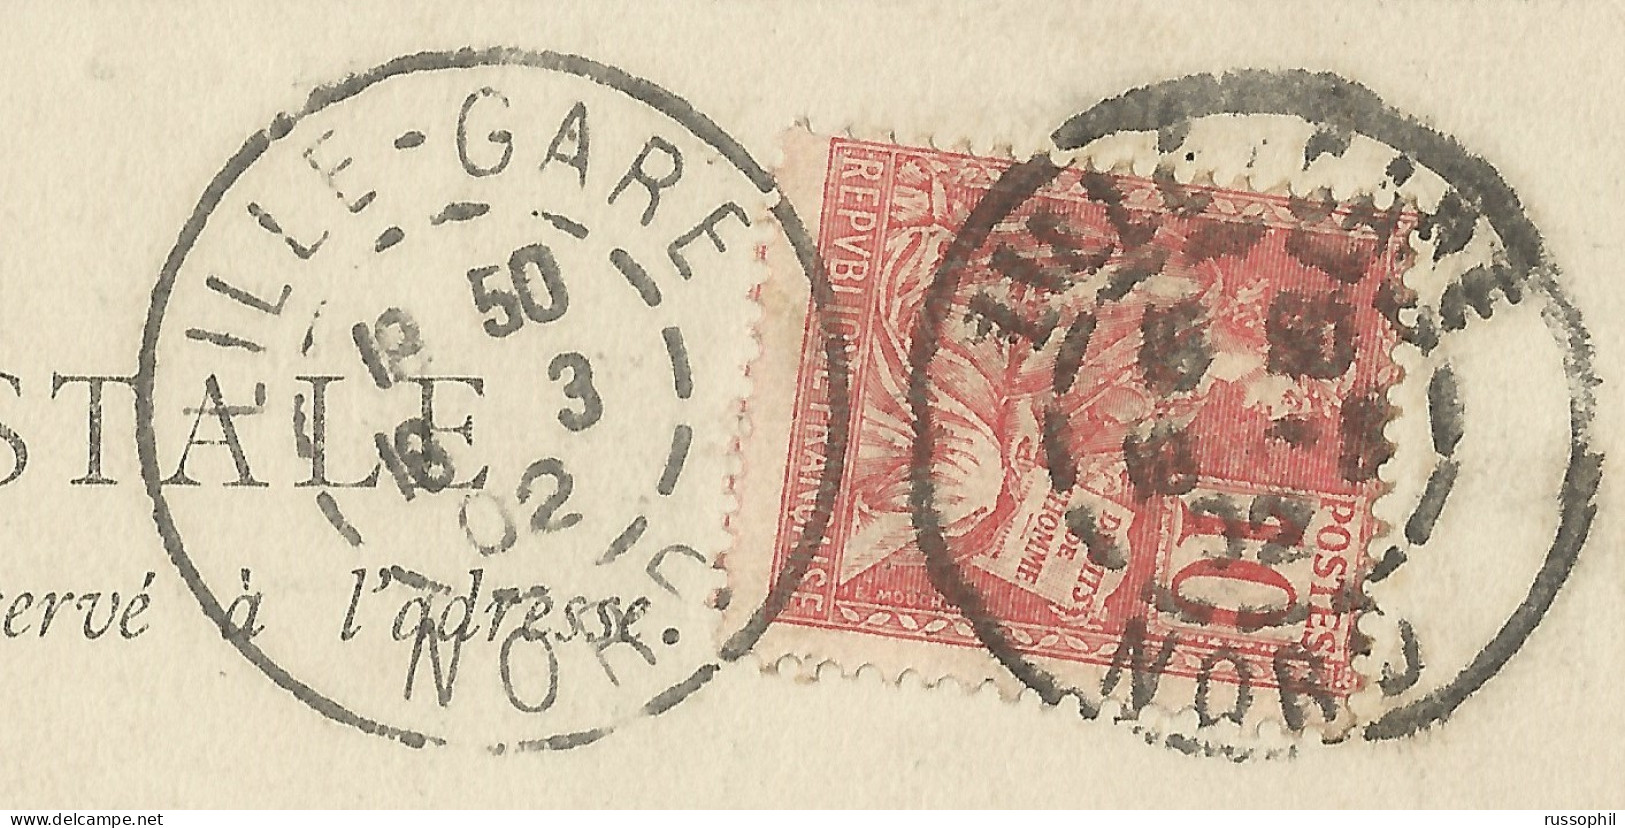 FRANCE - 59 - A3 PAIRED DAGUIN LIILE GARE - 1 CDS LARGE & 1 CDS SMALL CAPS LETTER - 1902 - Lettres & Documents